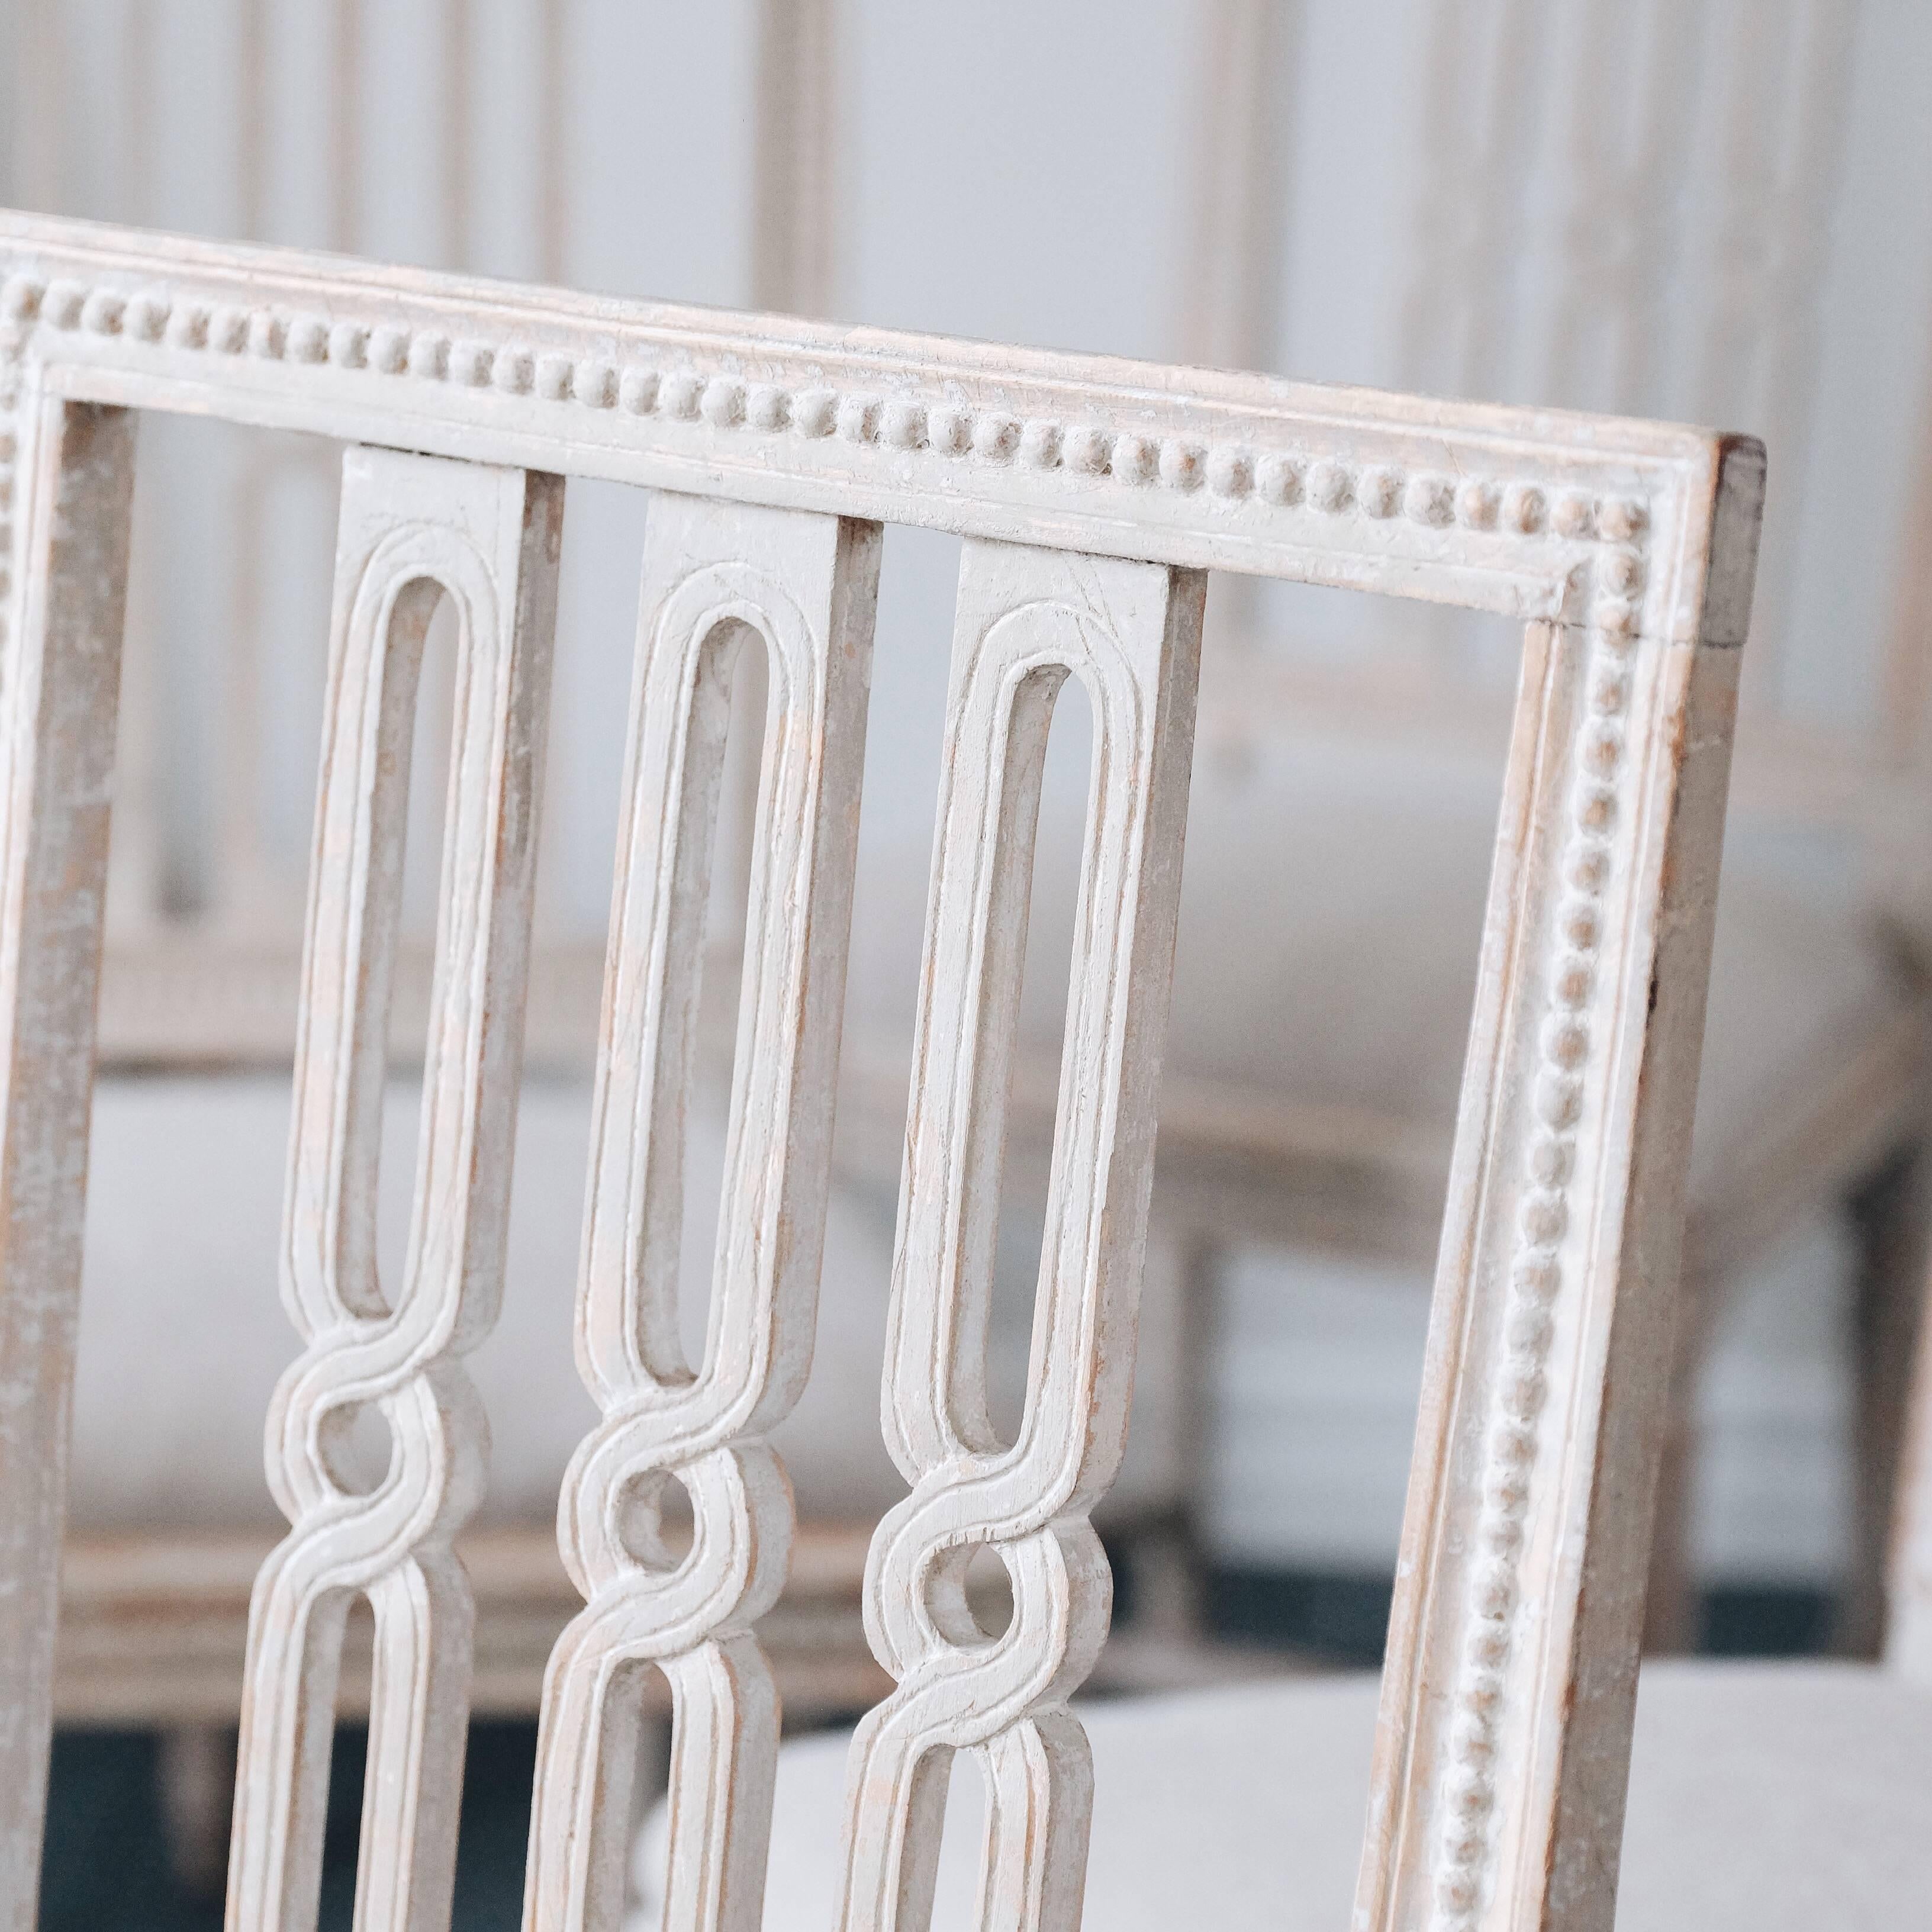 A fine and original set of six 18th century Gustavian period dining chairs in outstanding quality. They have been expertly dry scraped to the original surface showing the original pearl grey colour. Stamped with the Stockholm chair makers guild and